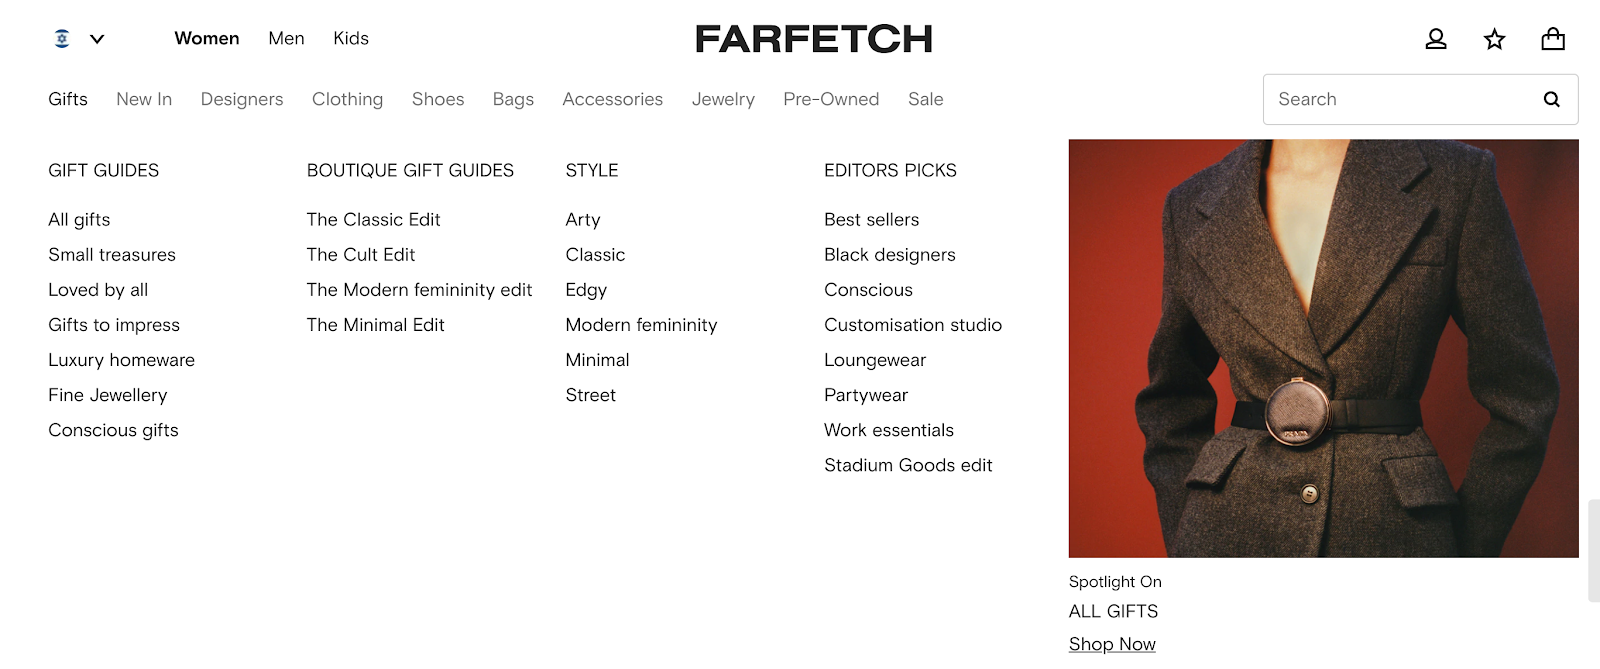 Farfetch's gift guides